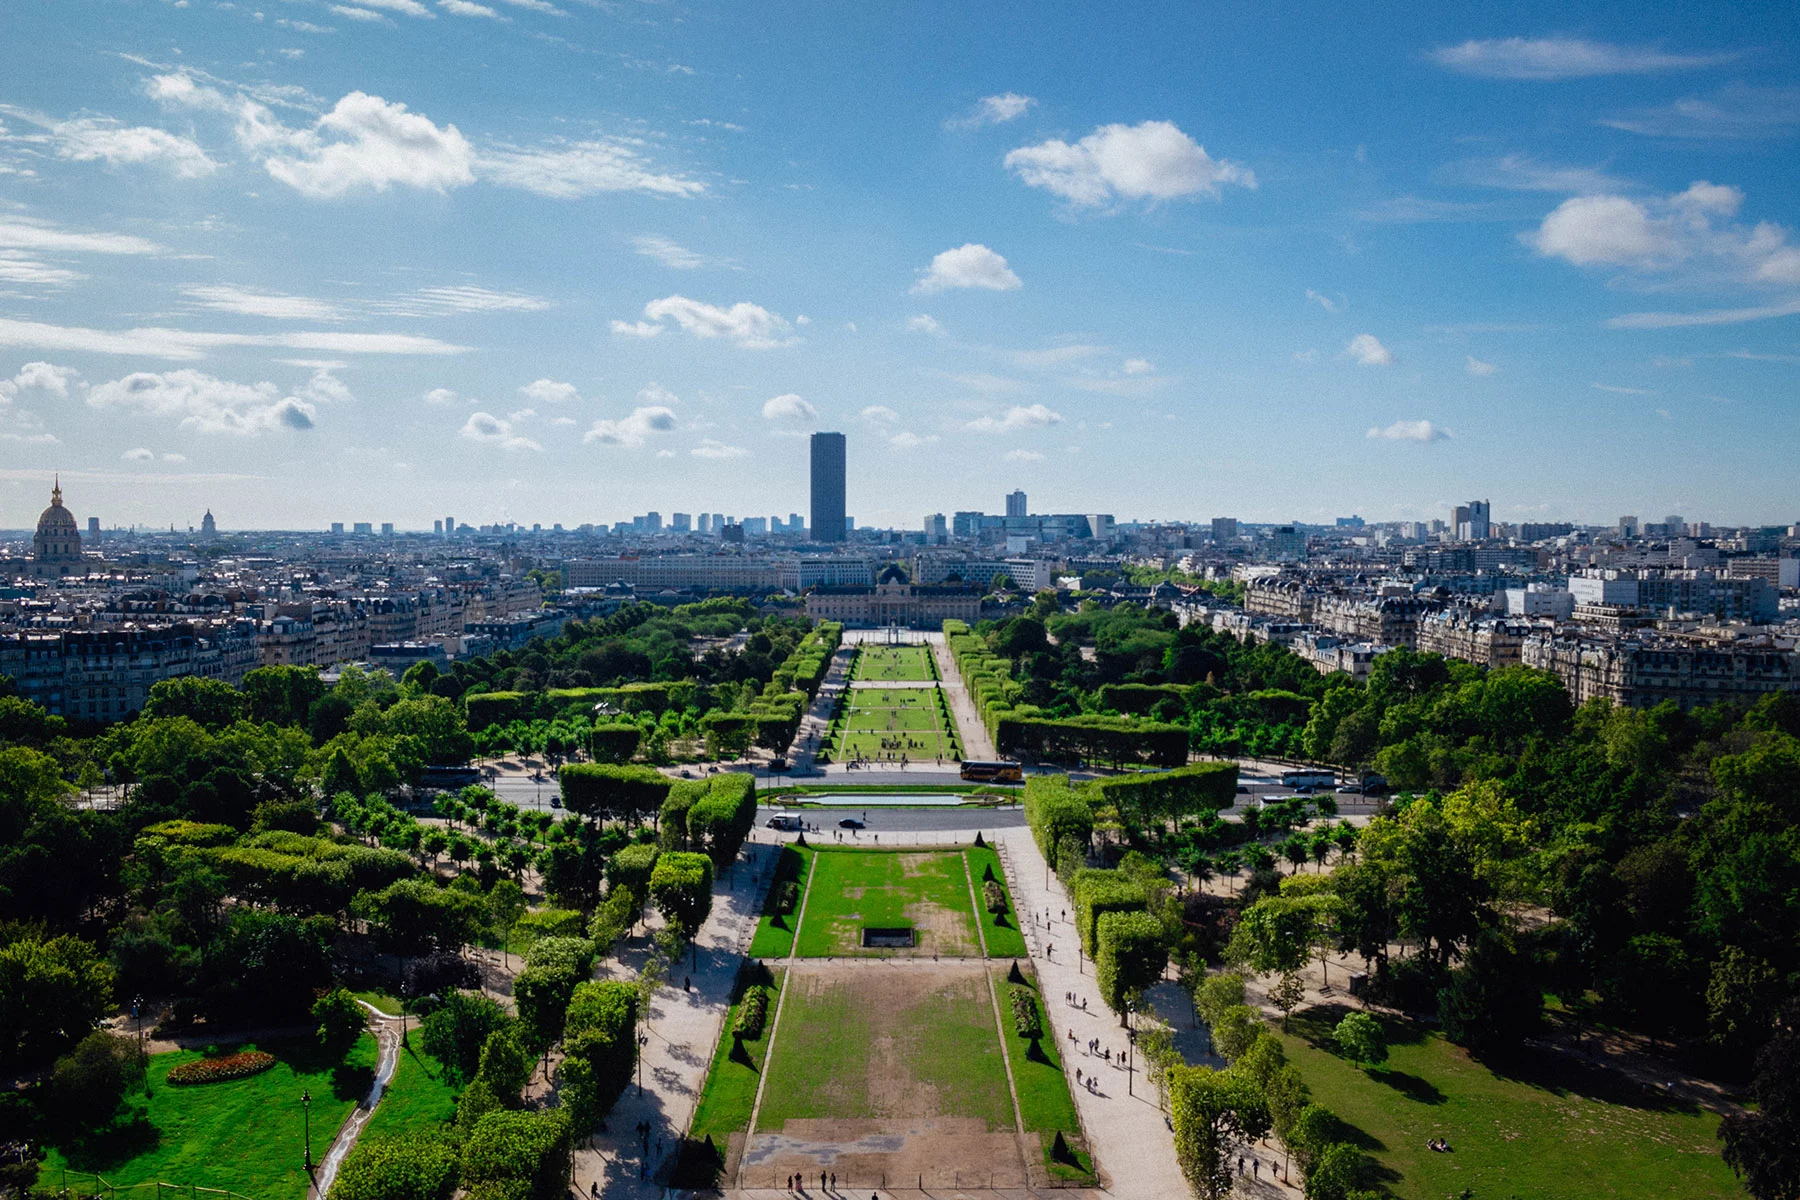 The Champs de Mars, seen from the Eiffel Tower, by Marcel Strauss